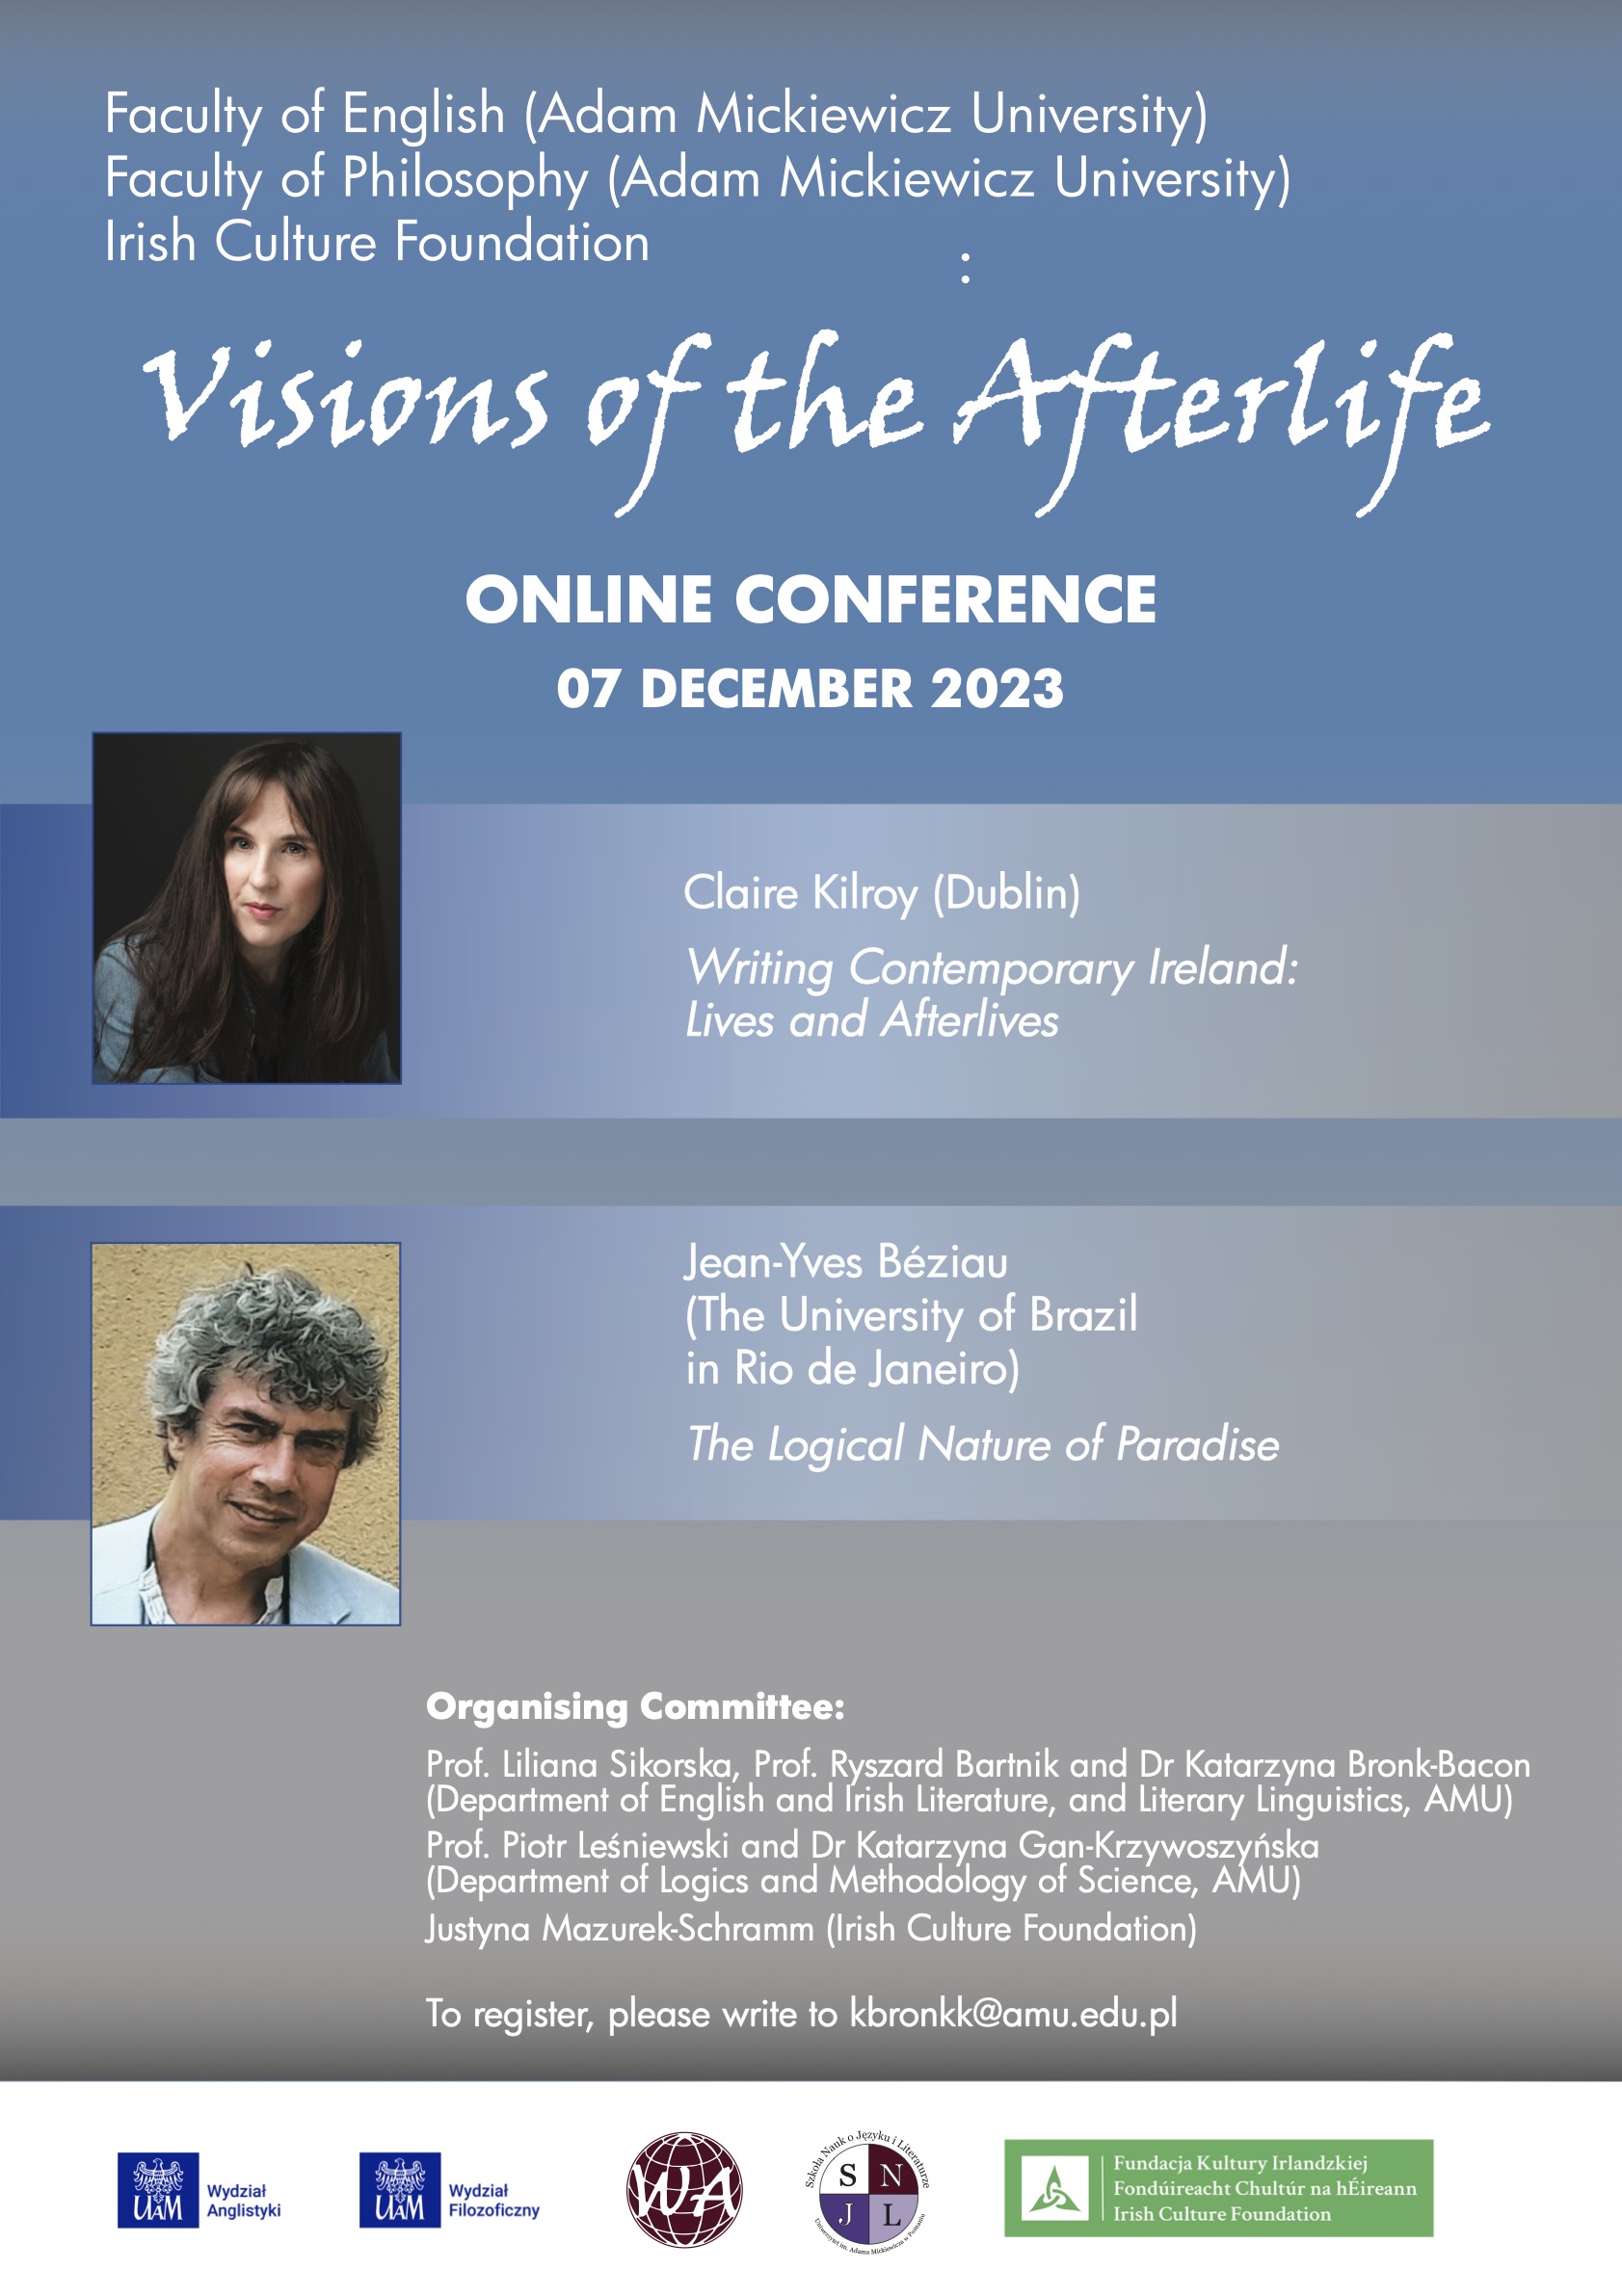 Visions of the afterlife - poster with images of two plenary speakers